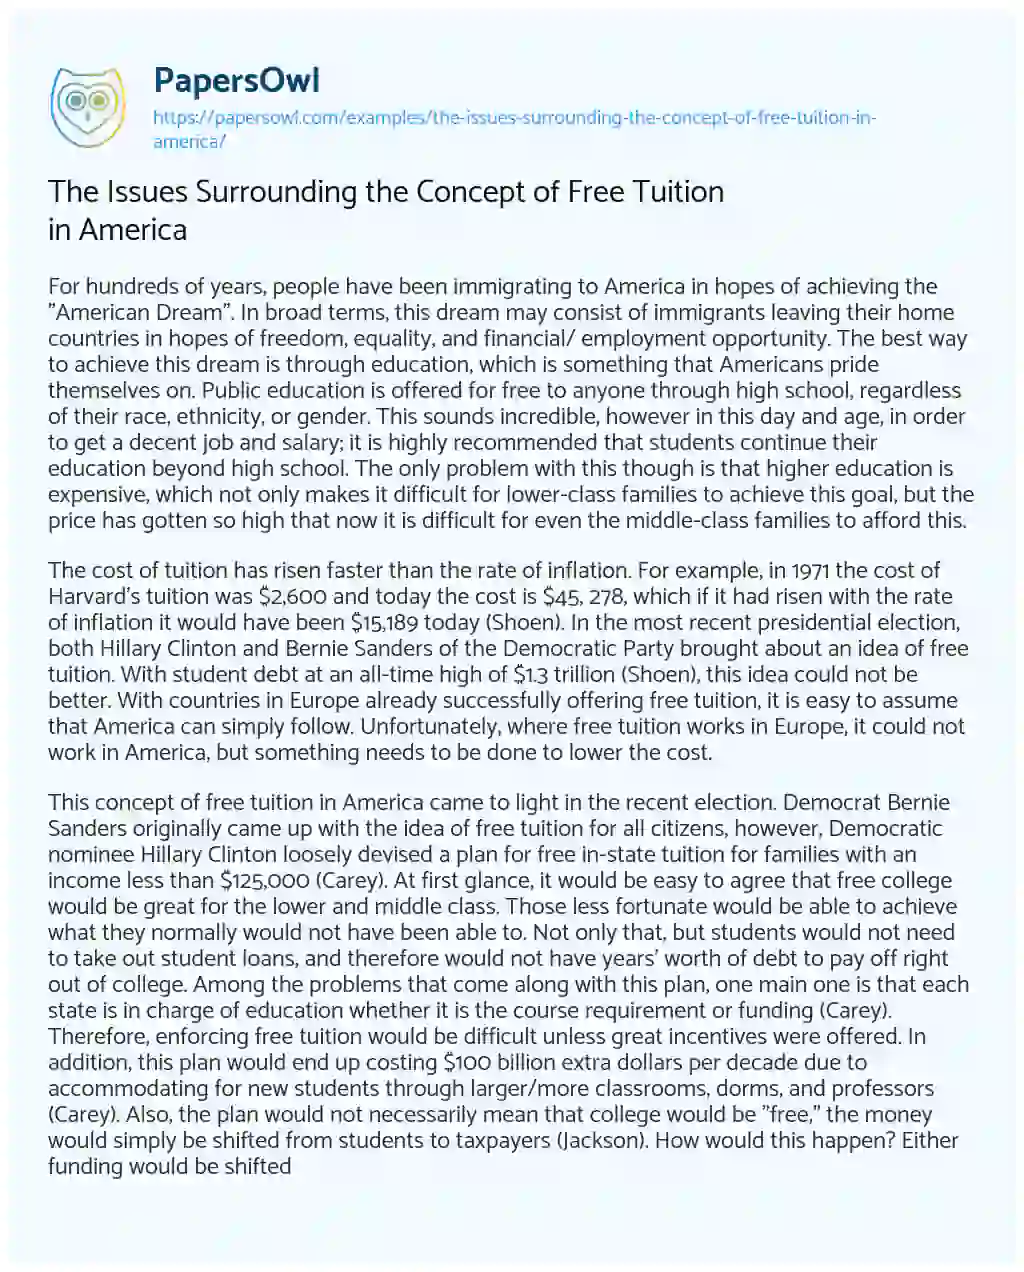 Essay on The Issues Surrounding the Concept of Free Tuition in America